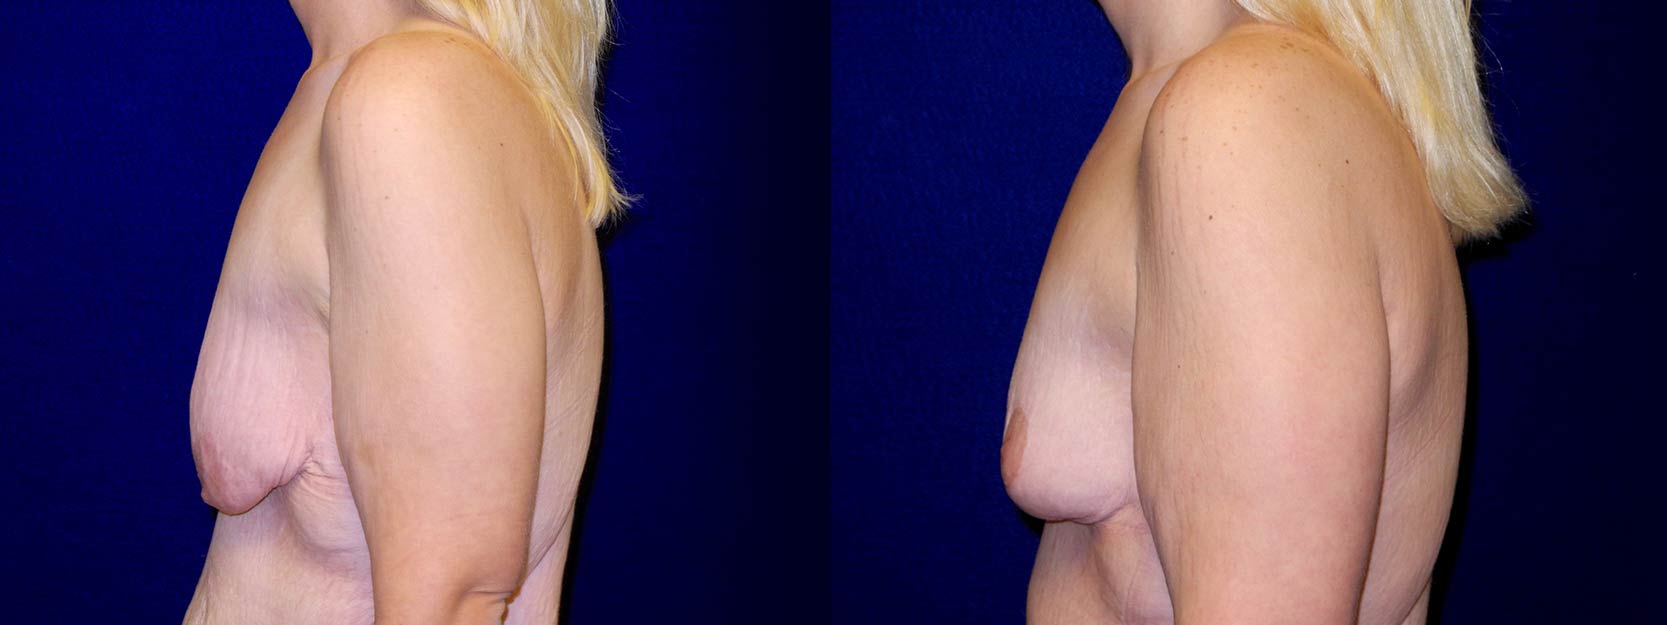 Left Profile View - Breast Lift After Weight Loss